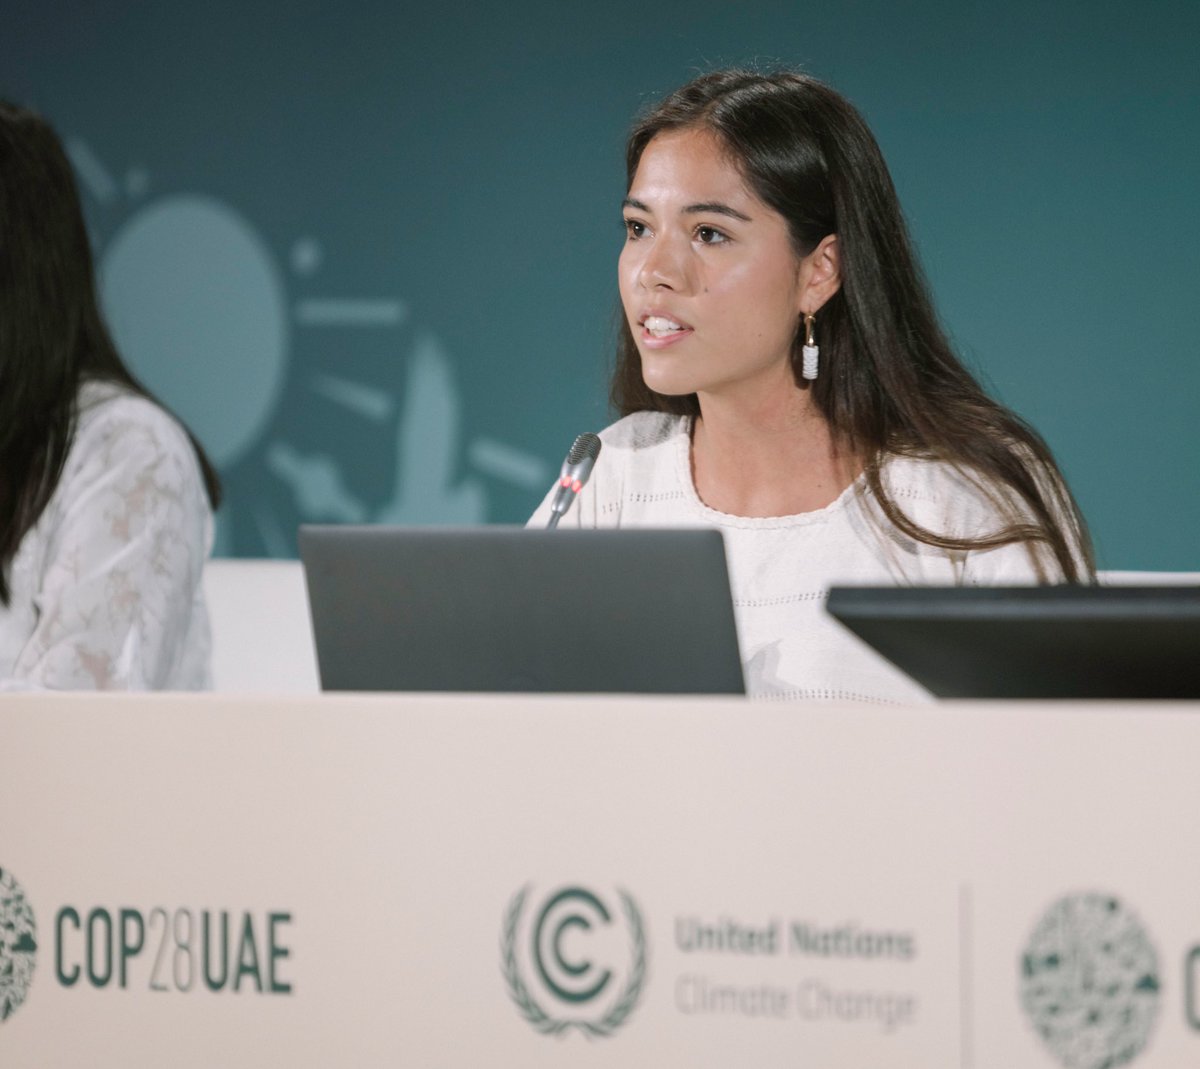 Not to be dramatic… but we shouldn’t have to grow up inside of the UN because we feel leadership is falling short of ensuring our livelihoods

COP25-COP28